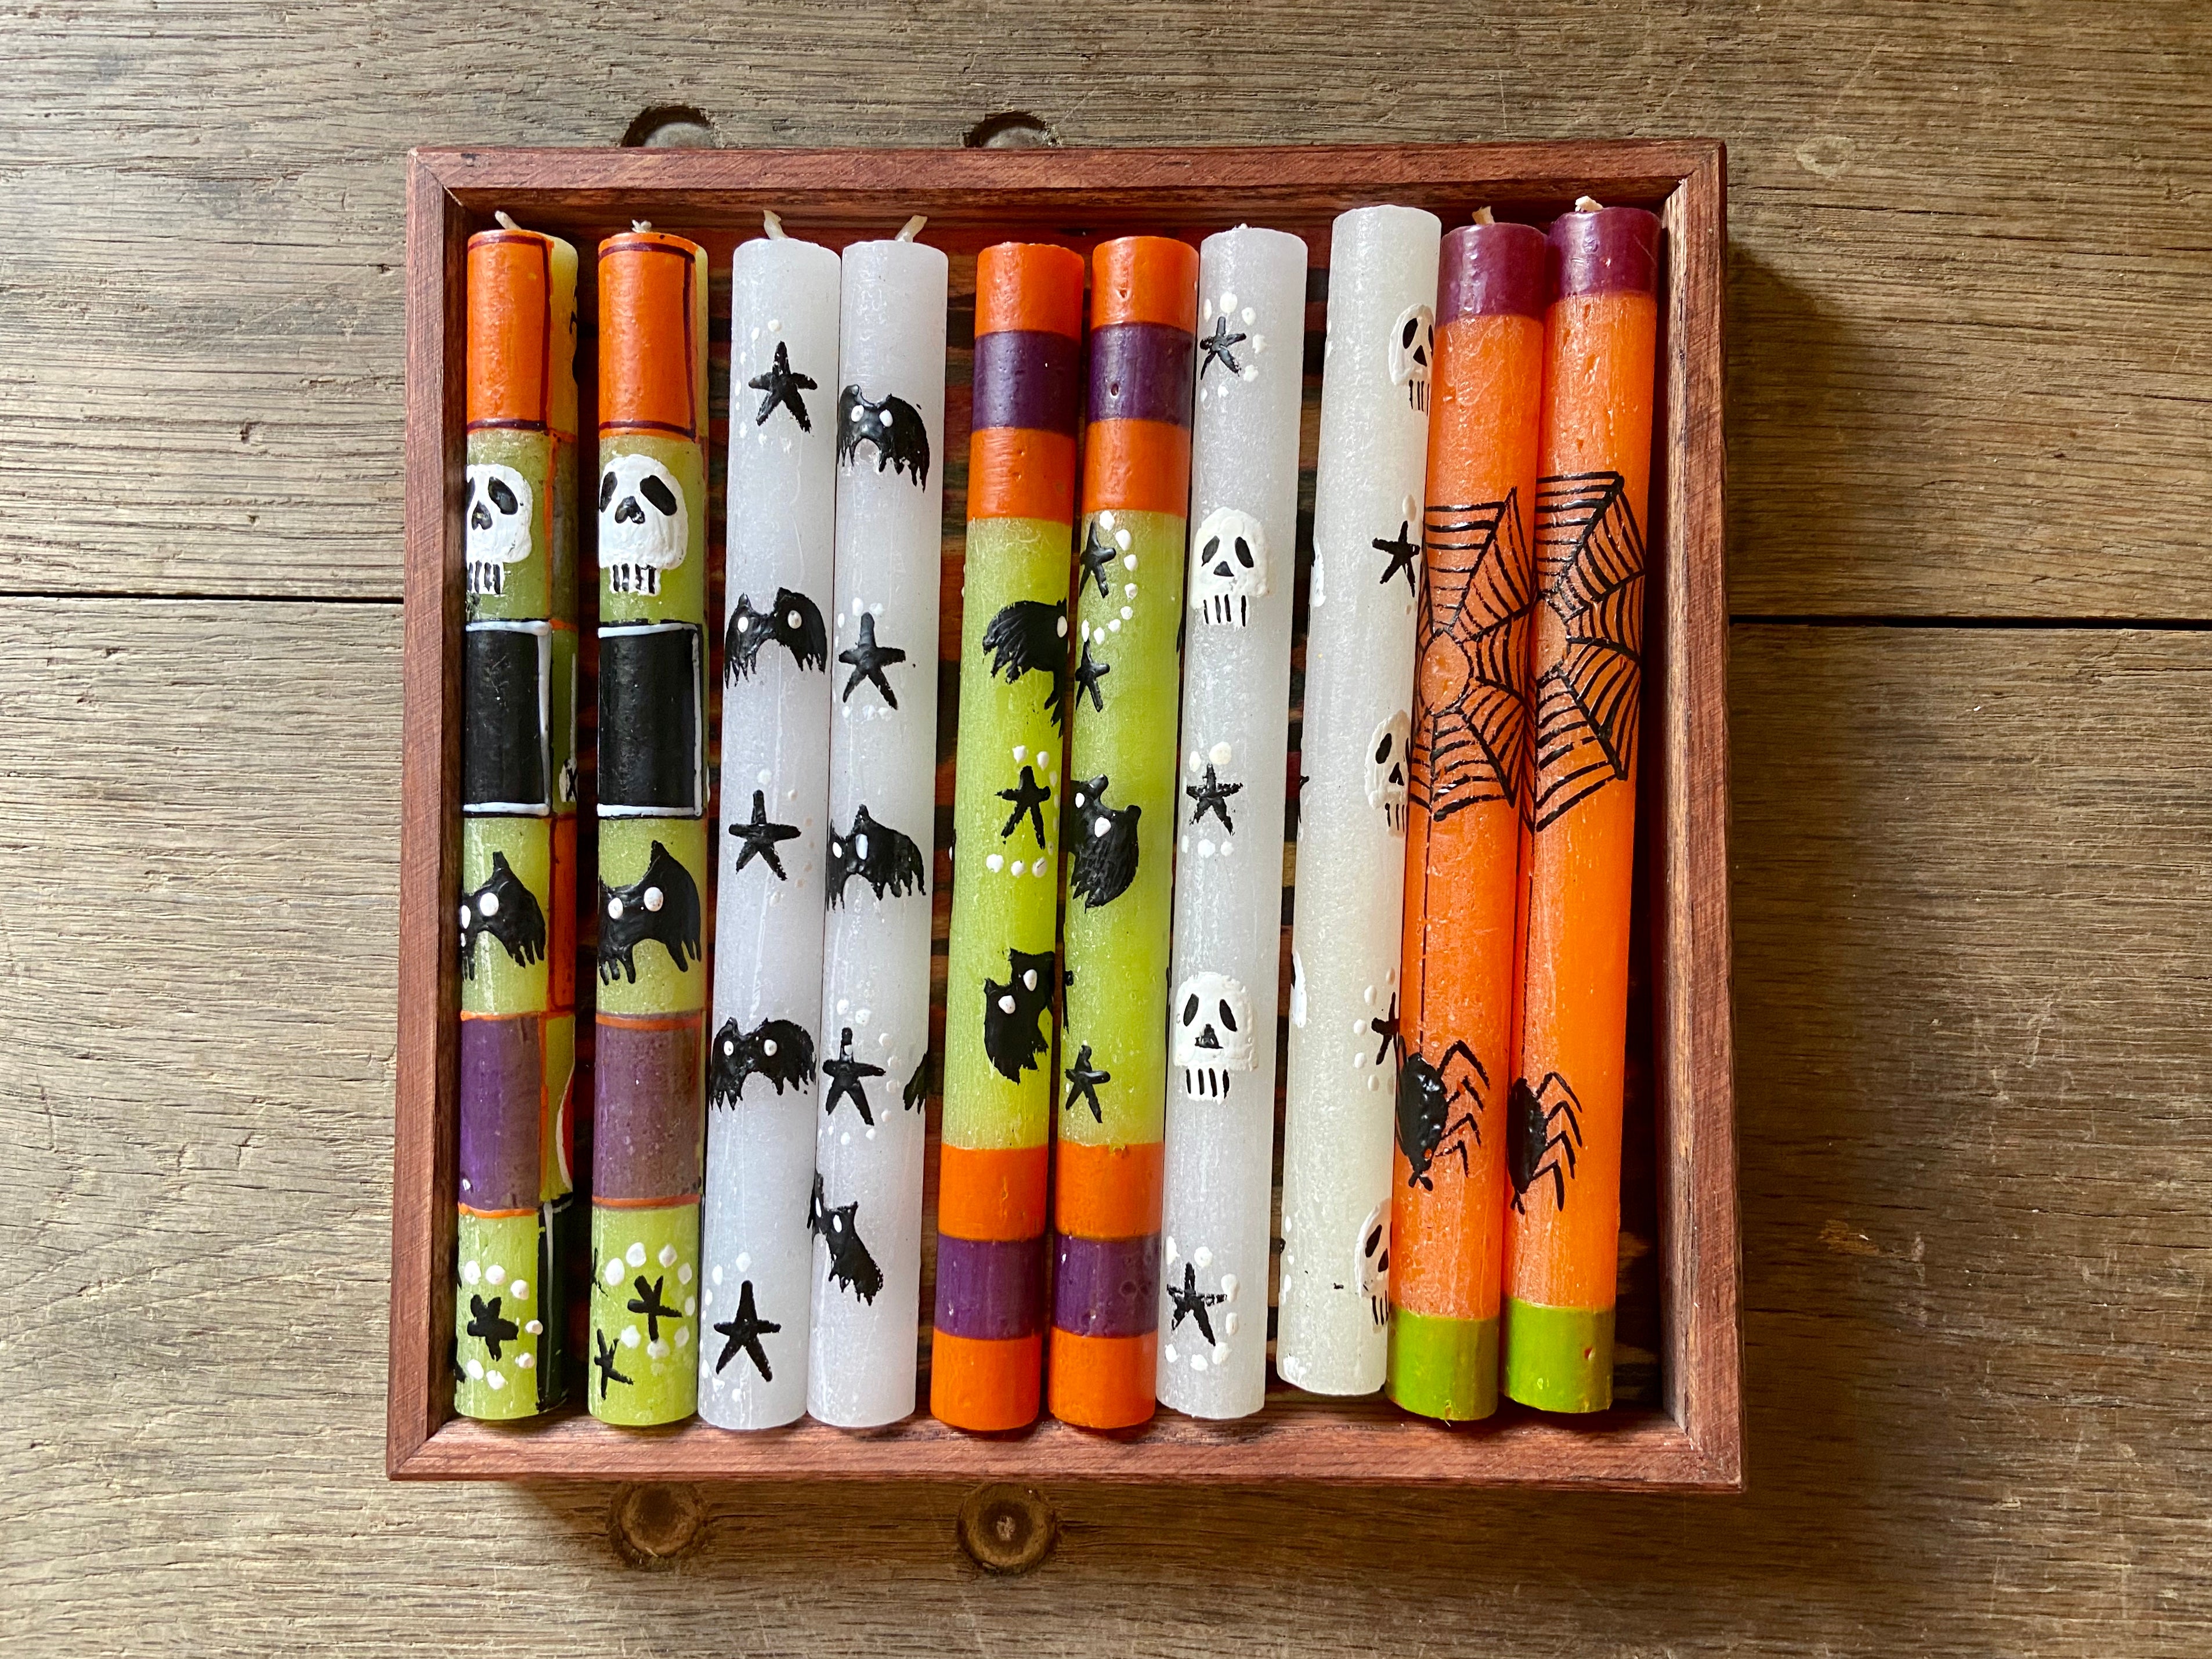 Halloween hand made & hand painted tapers candles. 5 different pairs; green background, with skulls and bats with orange & black squares, white candle with bats and black stars, green candle with orange & purple stripes with bats and black stars, white candles with skulls and black stars, orange candles with spider nest and spider crawling up the candle! 